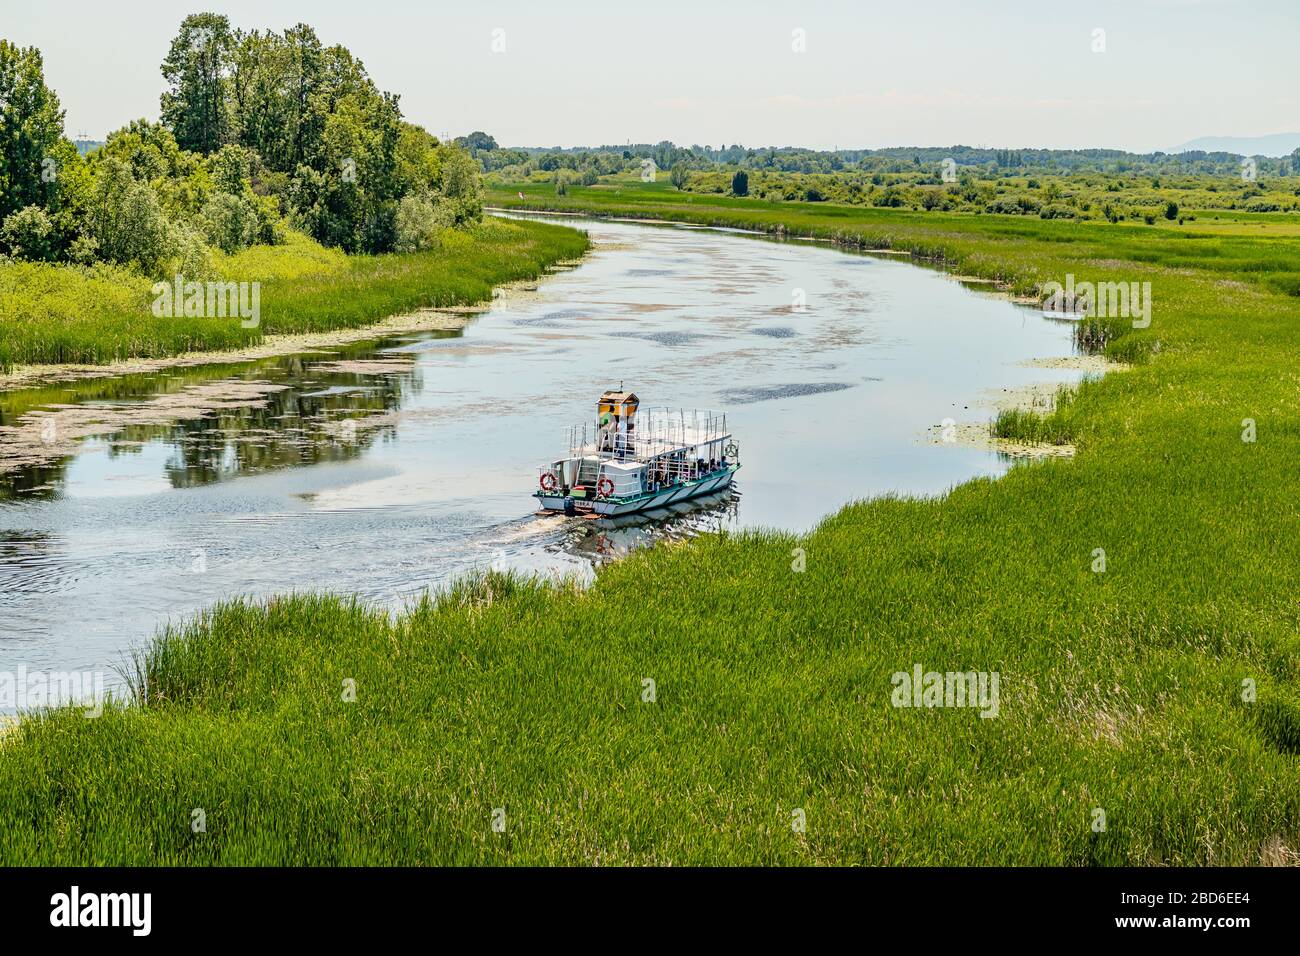 The River Zasavica, a tributary of the River Sava, flowing through the marshy Zasavica national nature park, Serbia. May 2017. Stock Photo